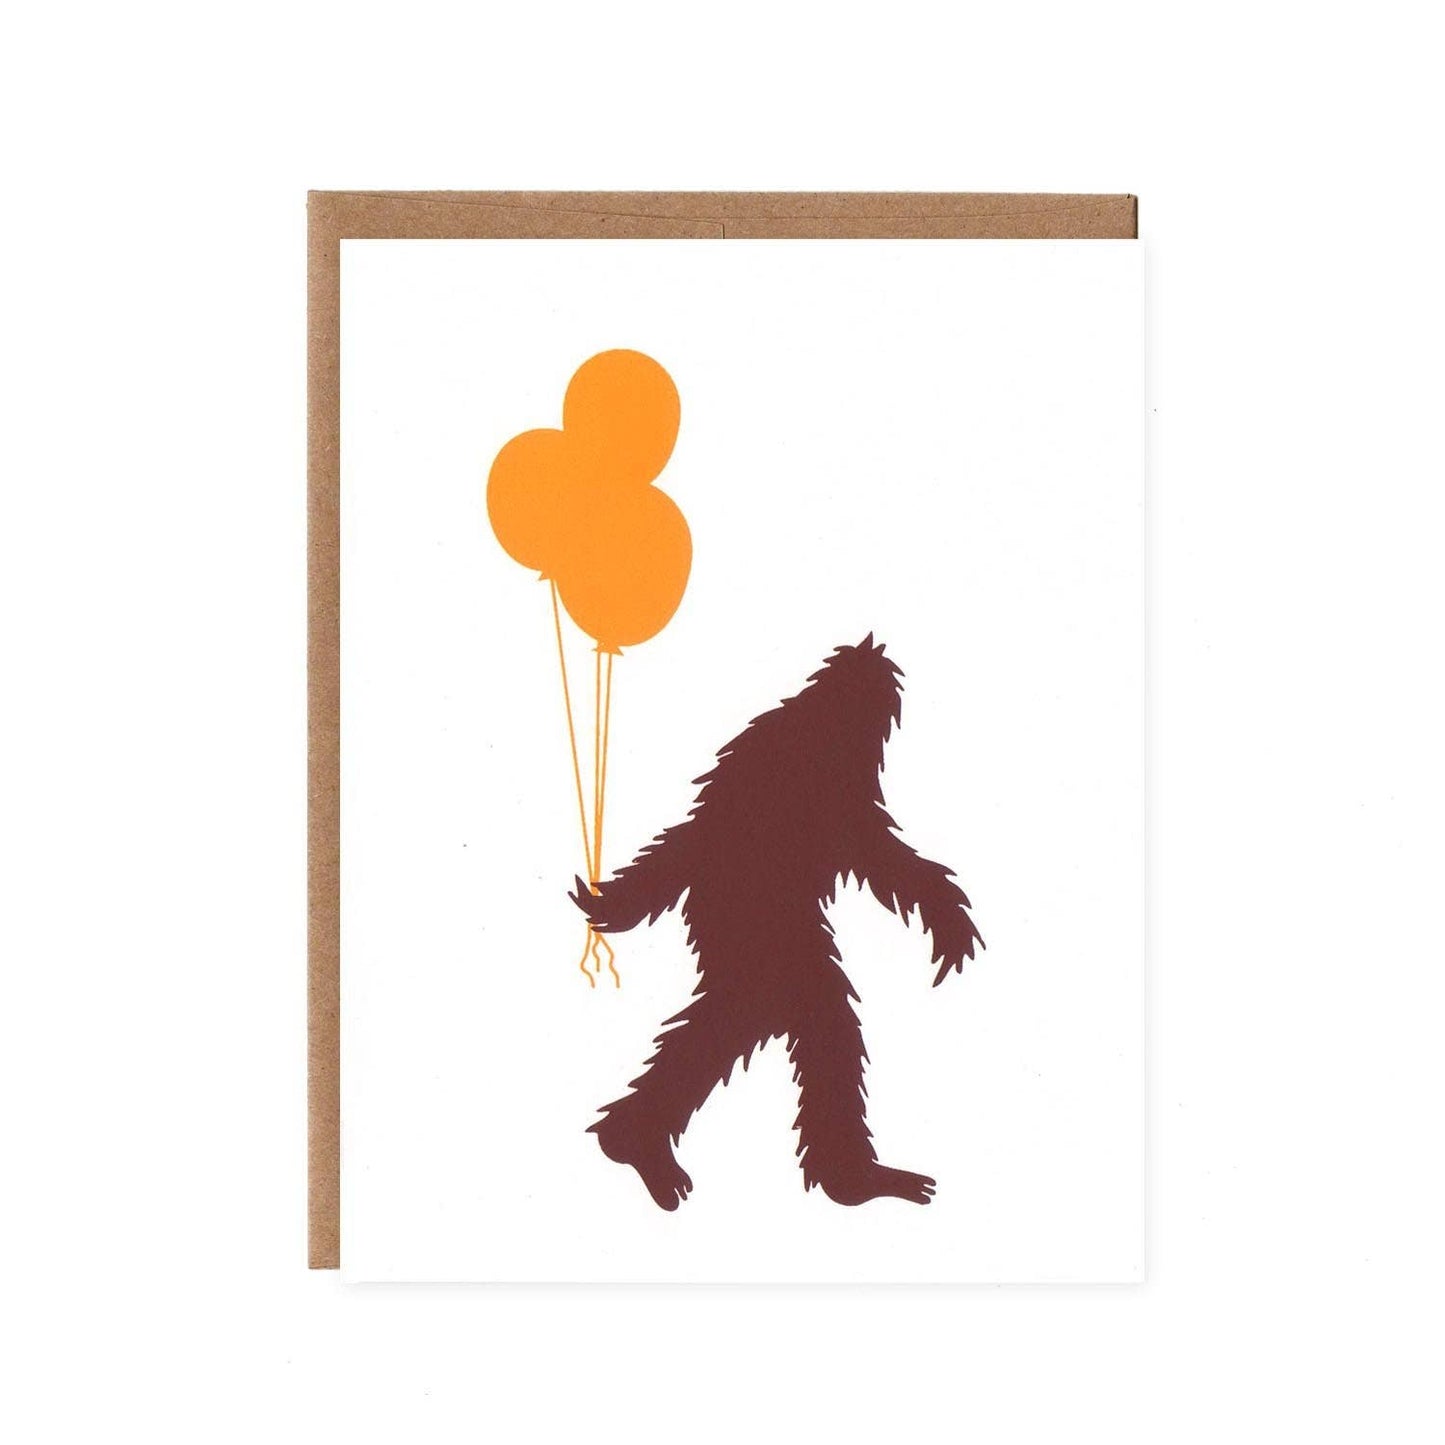 Sasquatch and balloons blank note card